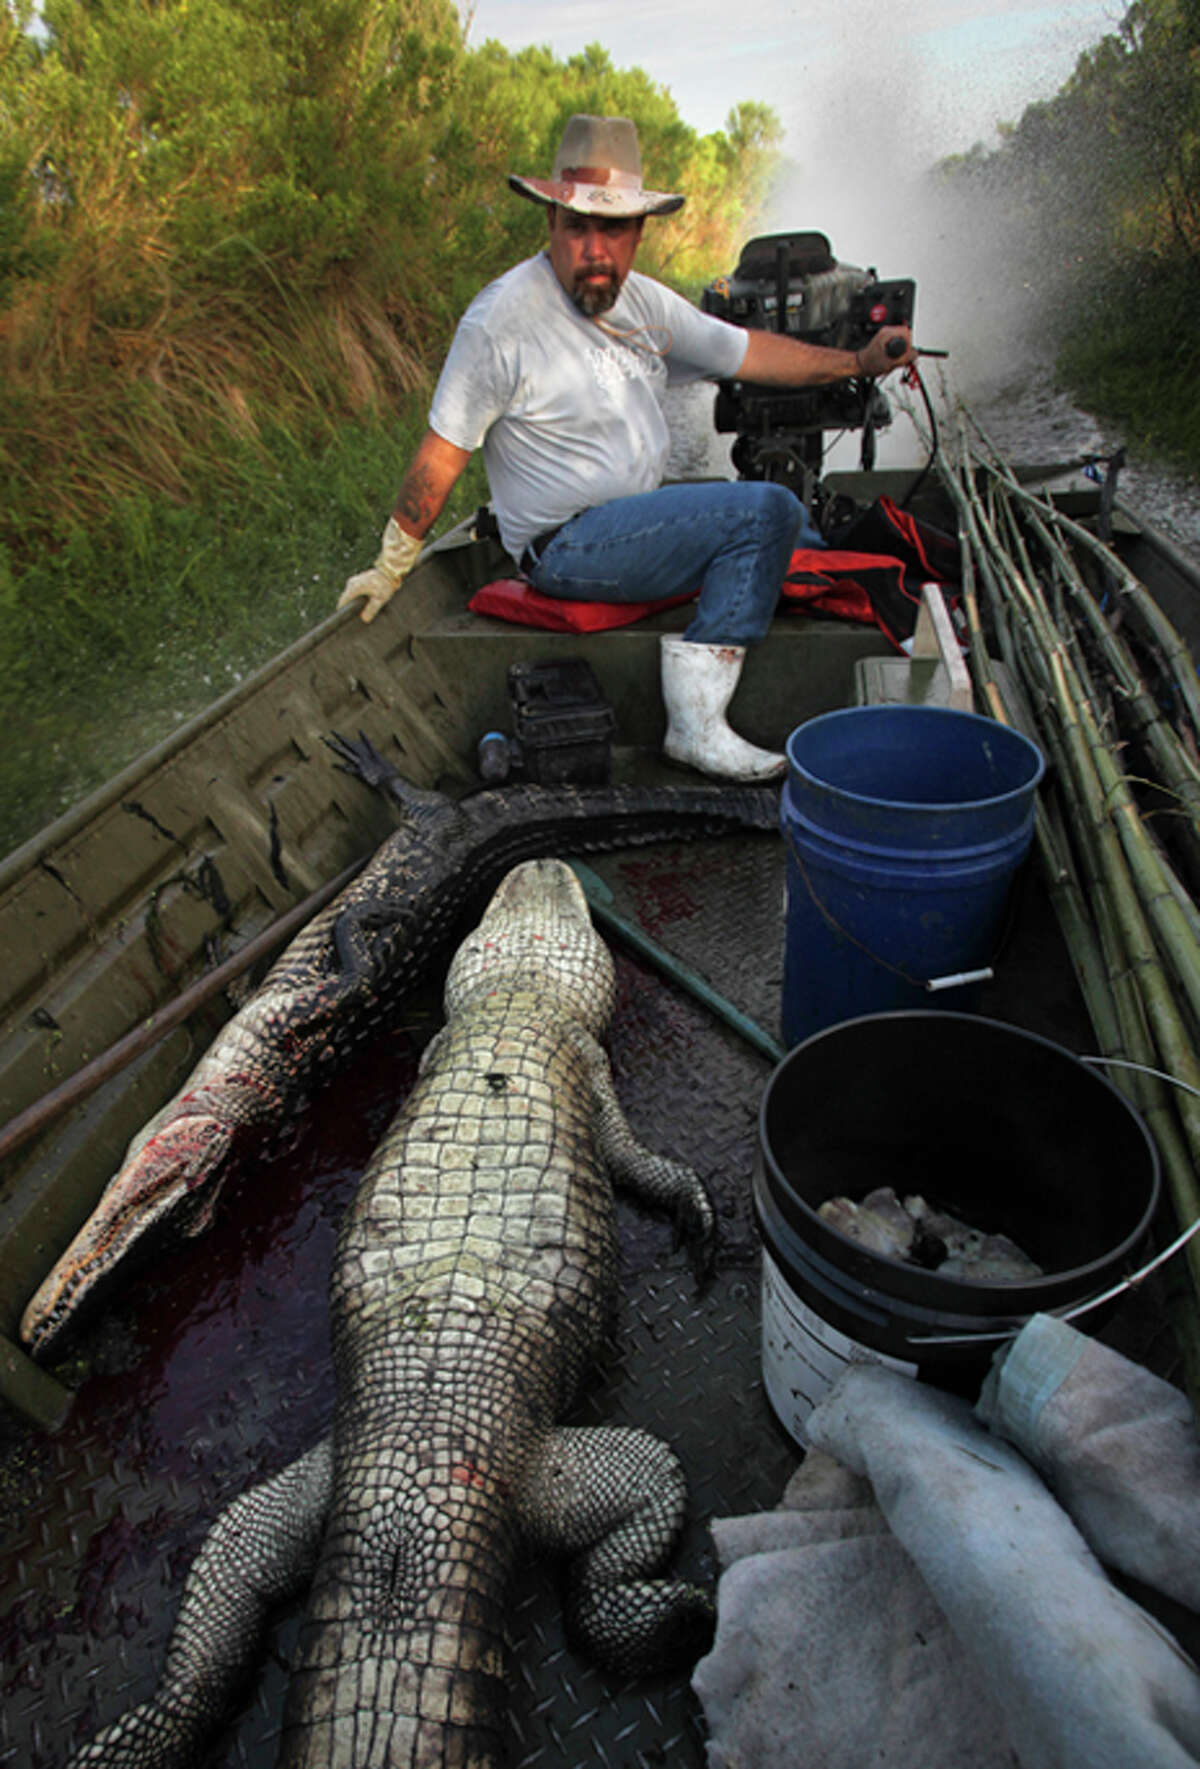 Gator hunter Lance Nacio is the third generation of his family to hunt the giant reptiles in Louisiana's swamps. Nacio caught 24 alligators in one day at the start of the La. season in August.